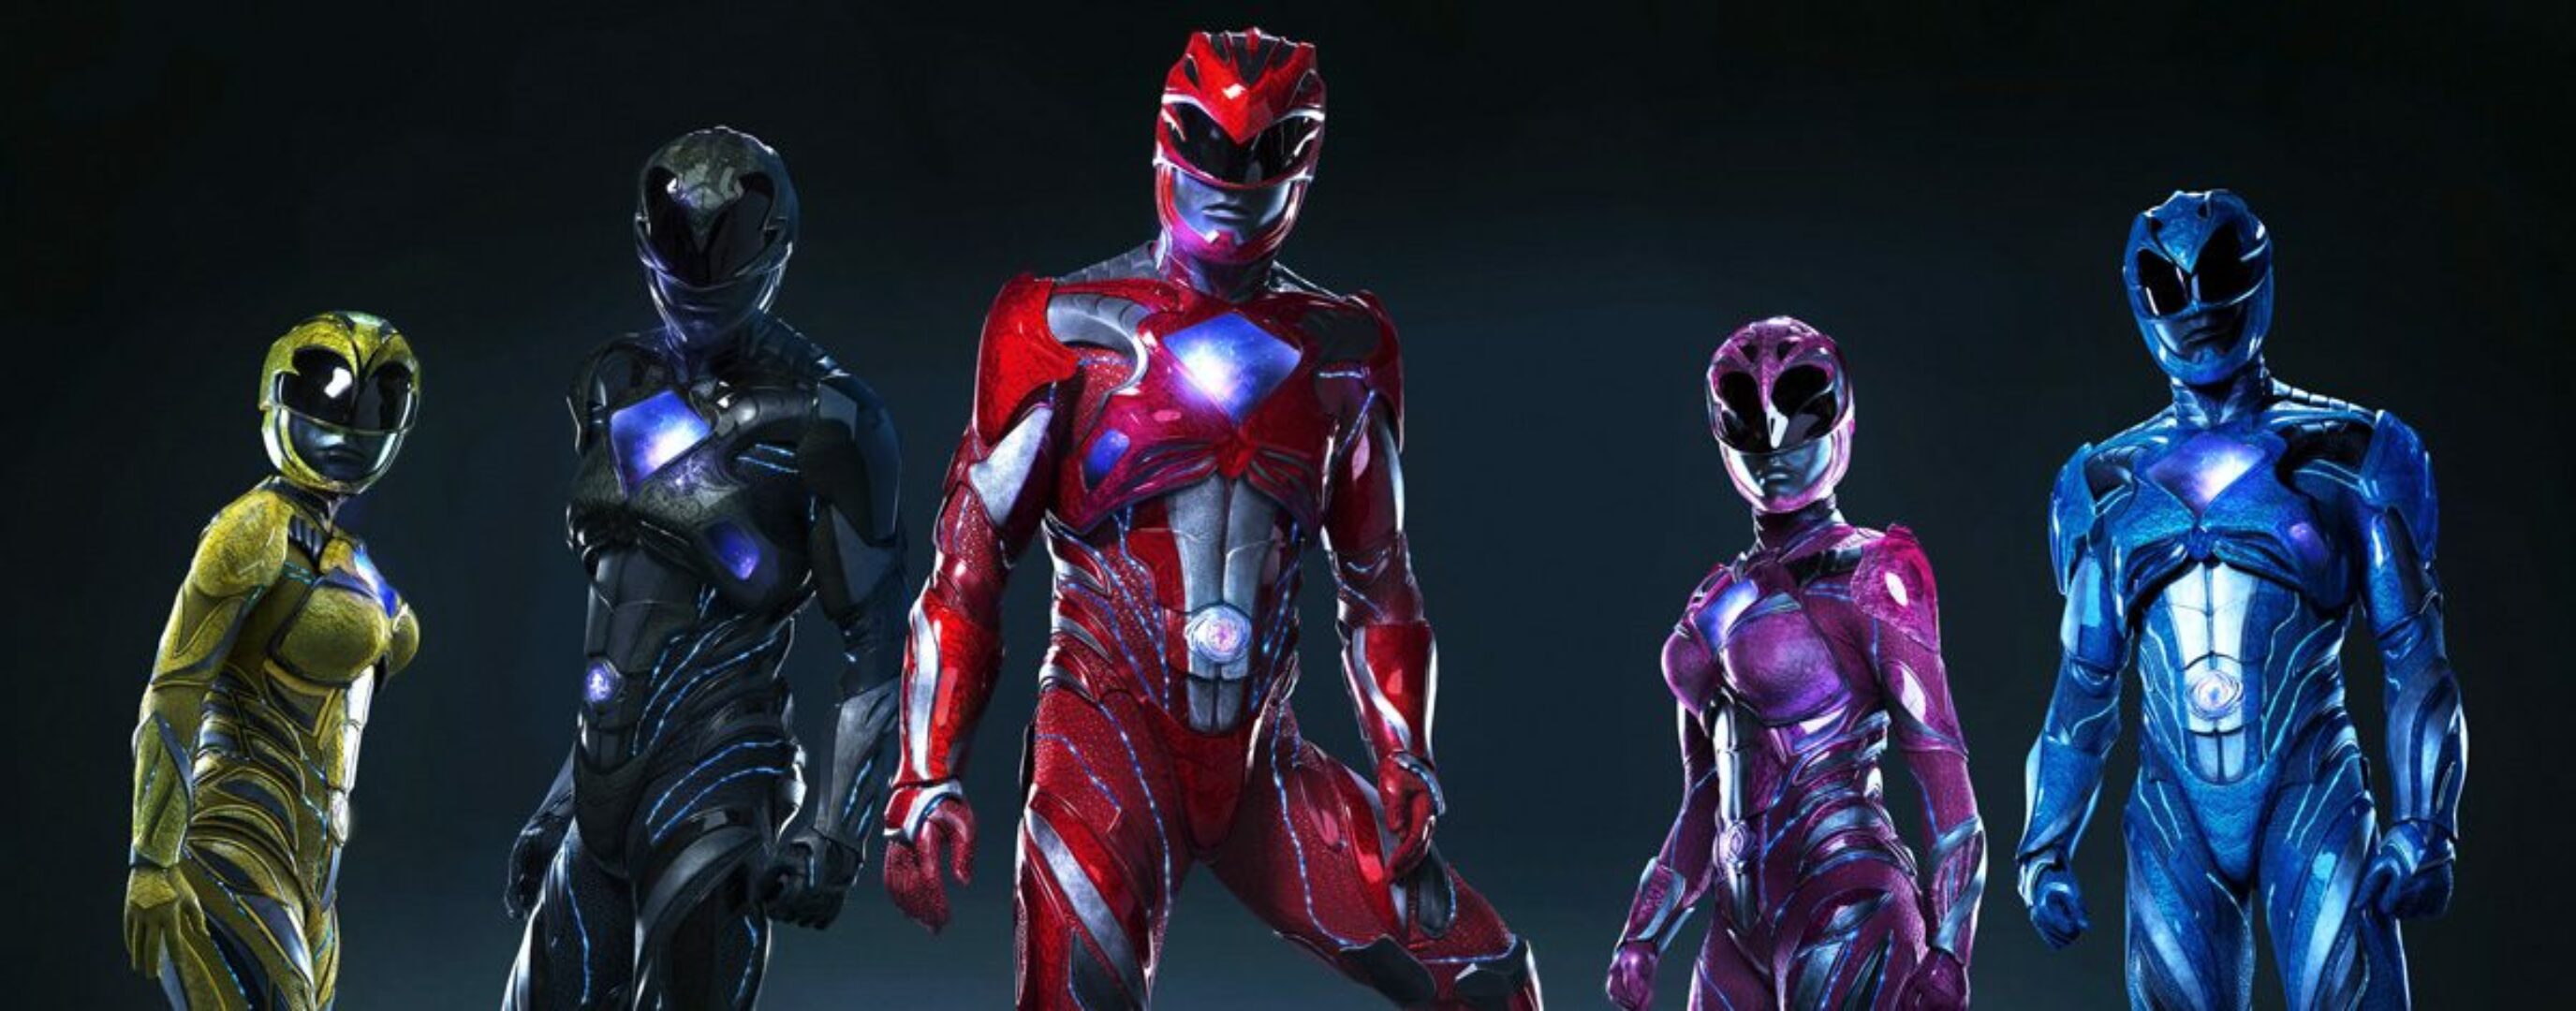 The Power Rangers Film Suits Revealed